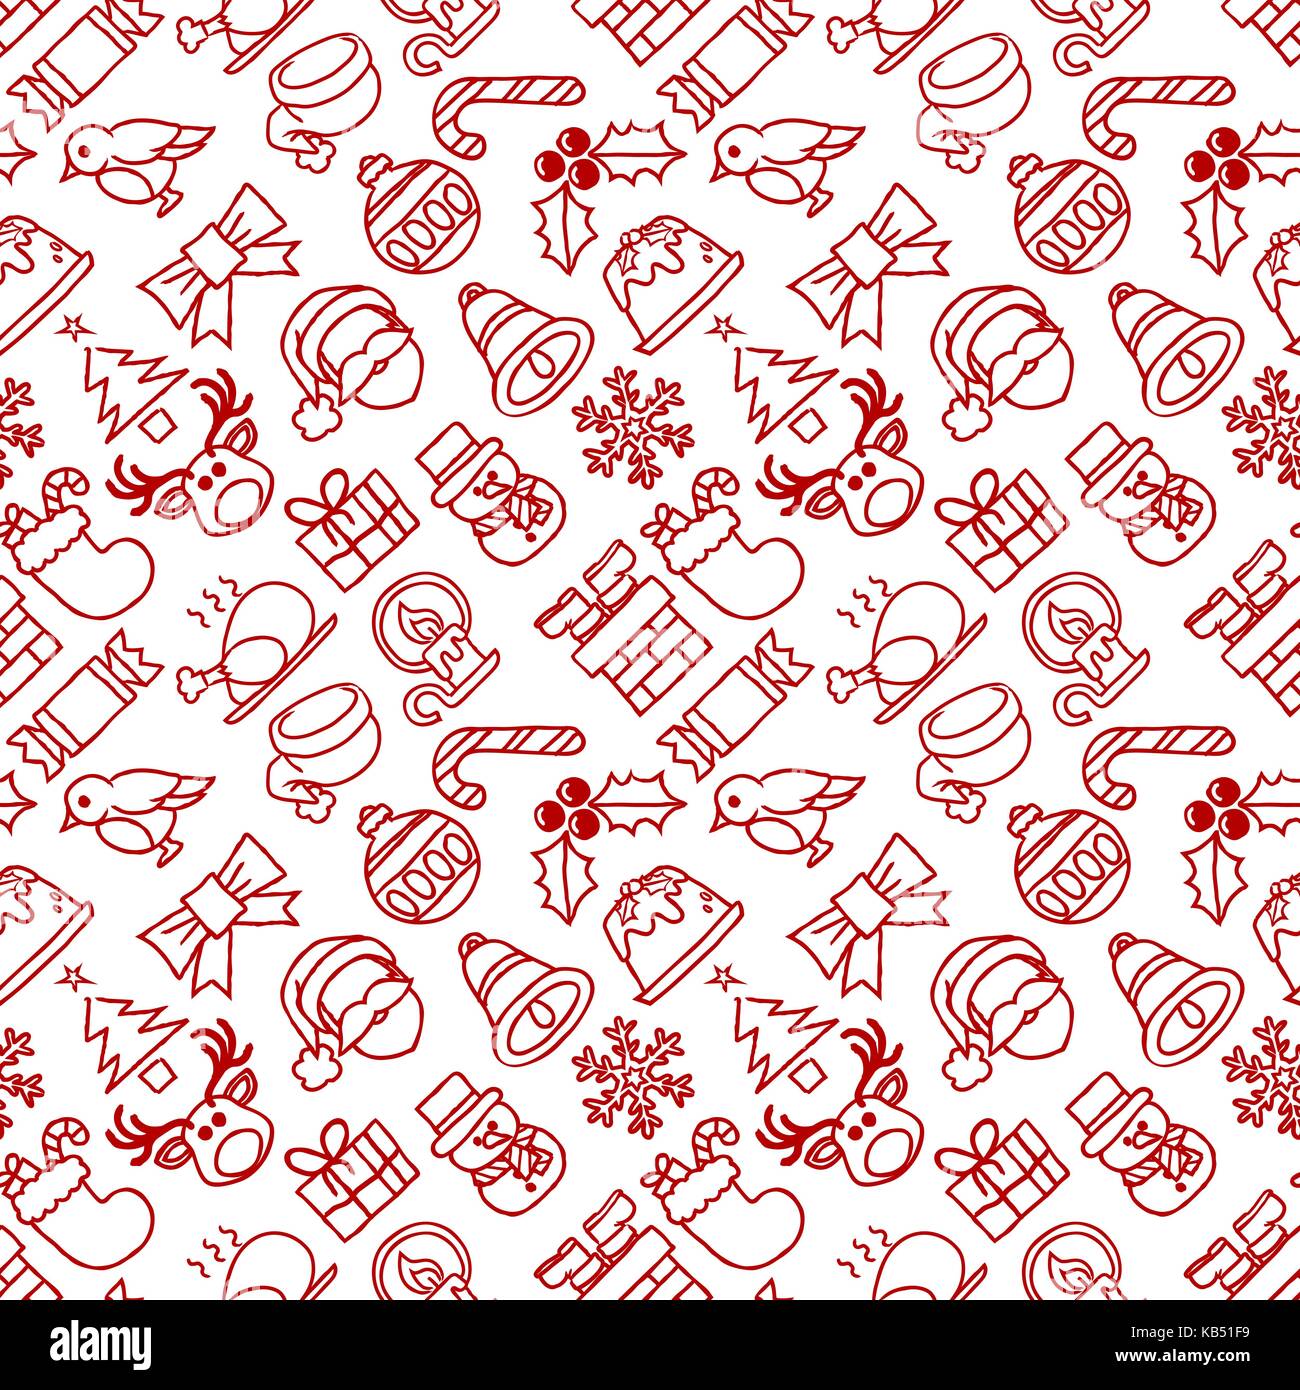 Christmas Seamless Pattern Background Stock Vector